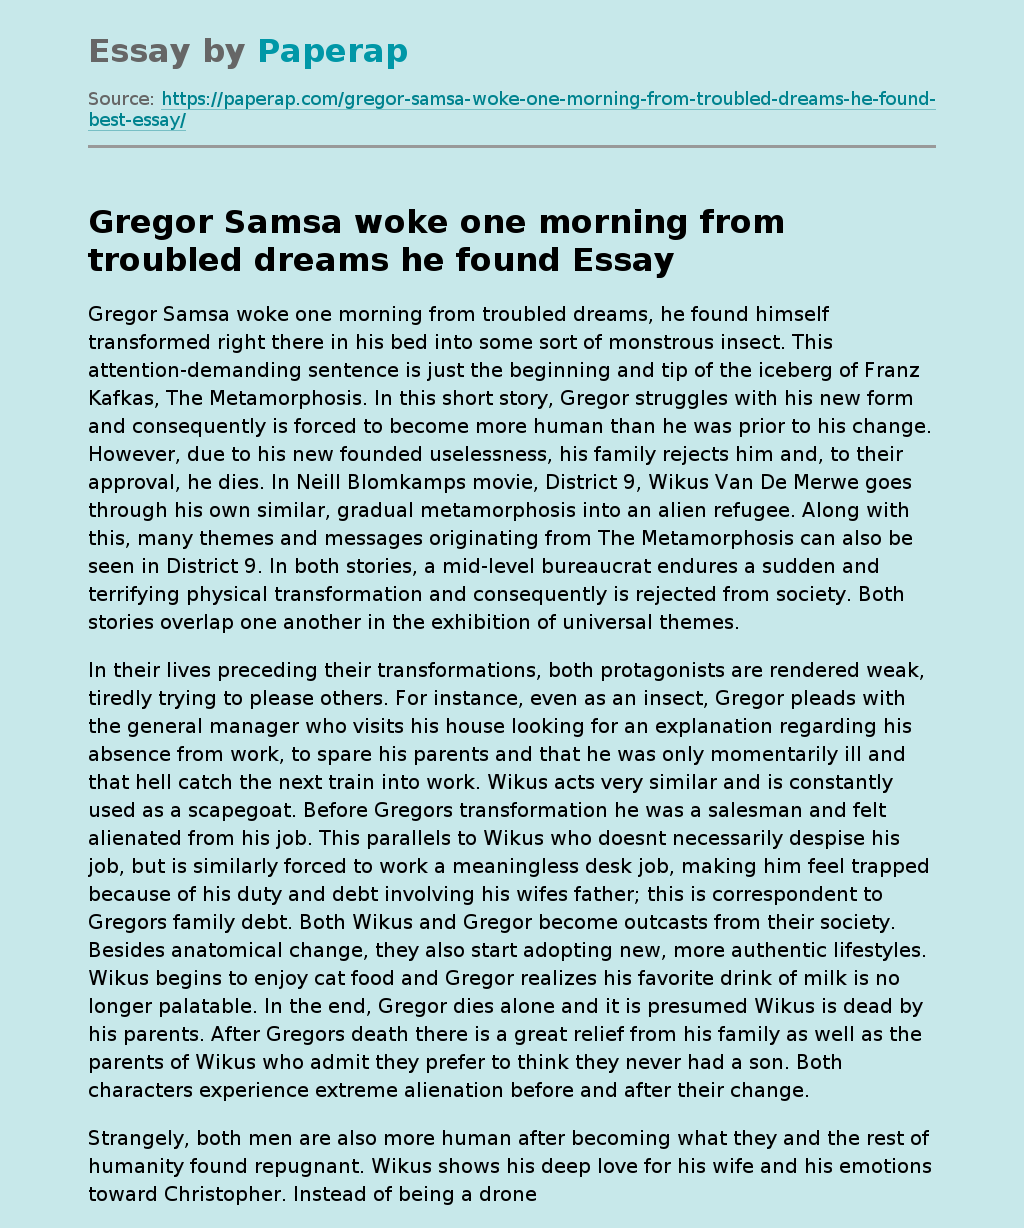 Gregor Samsa woke one morning from troubled dreams he found